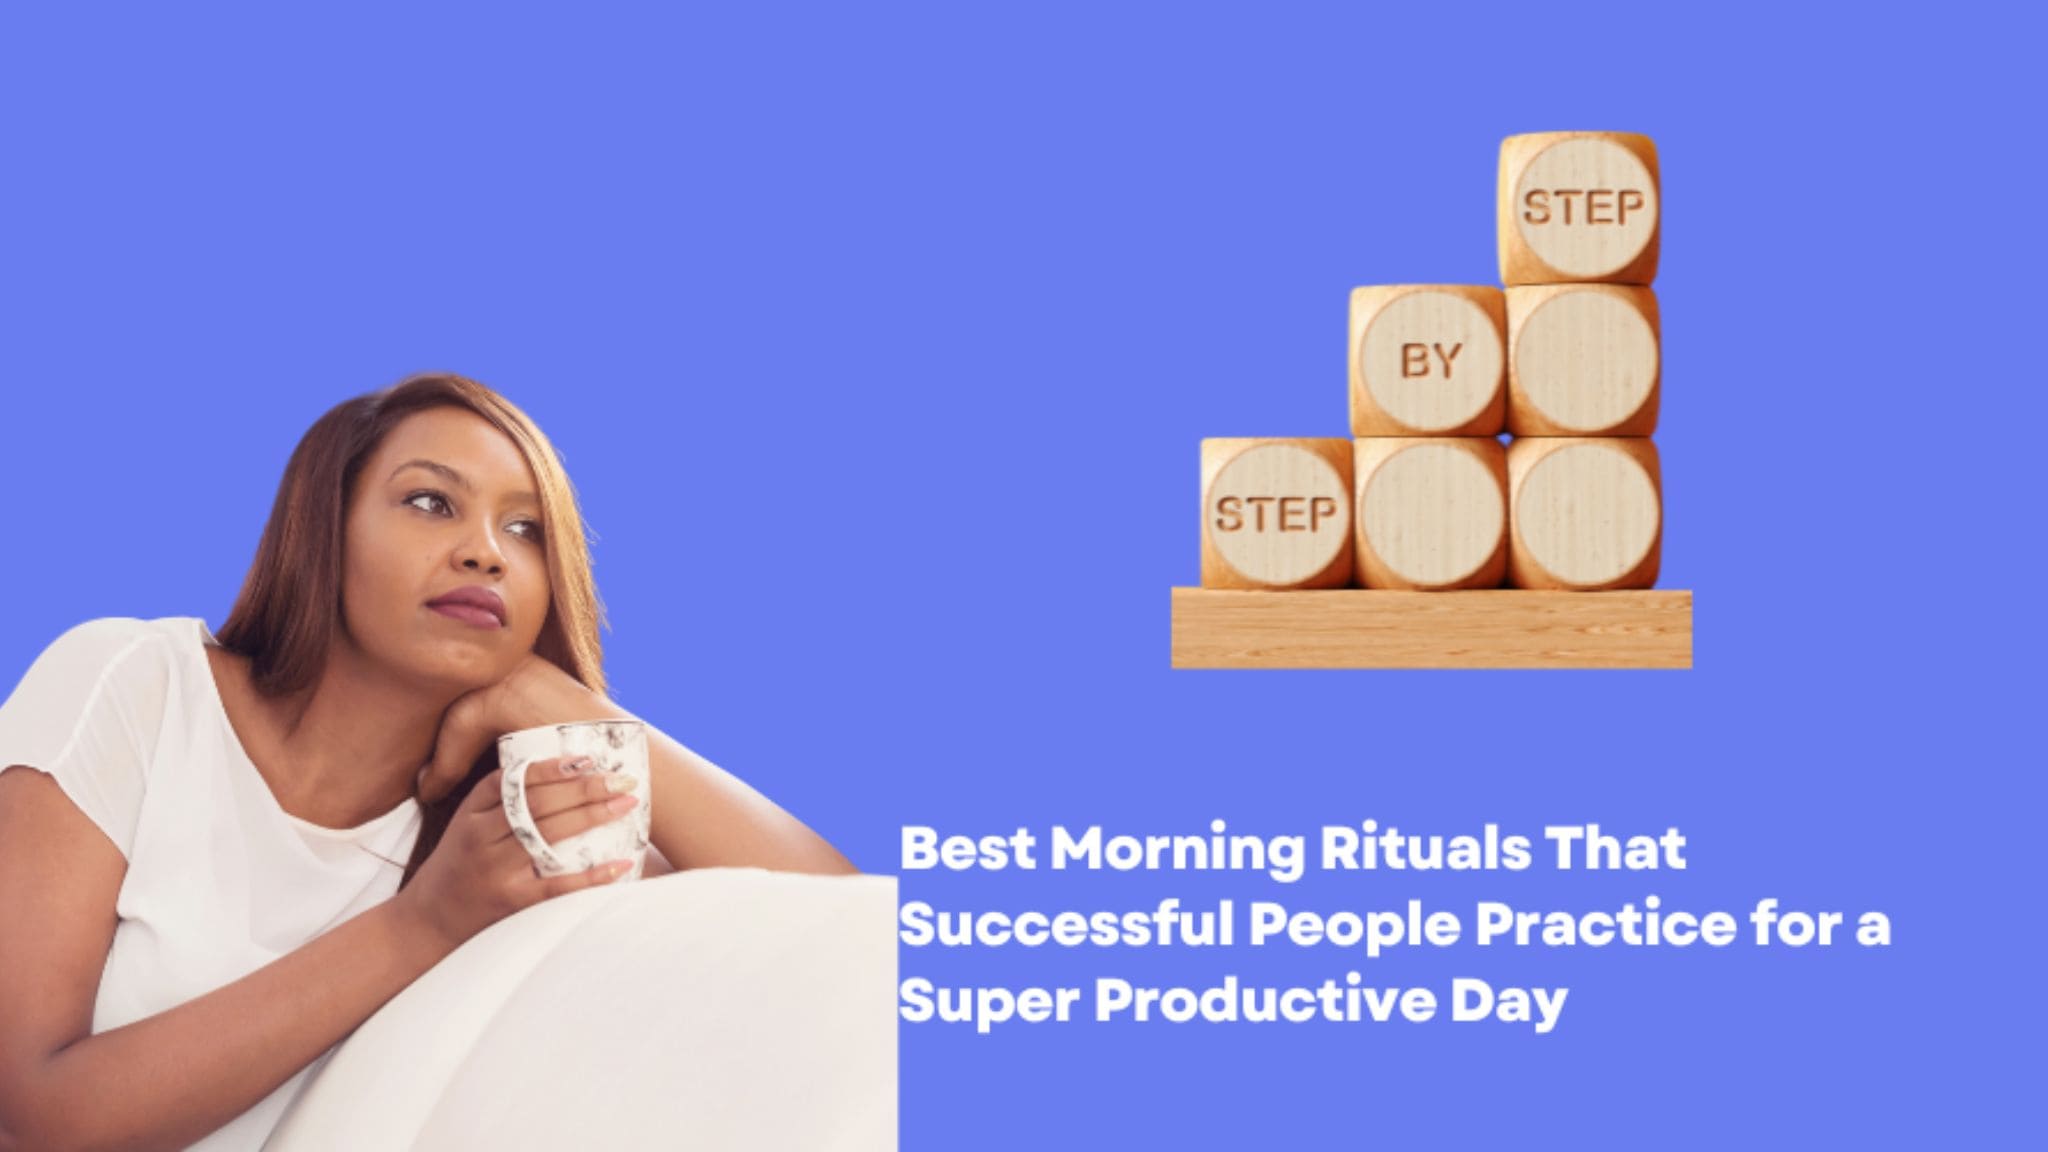 5 best morning rituals for a super productive day